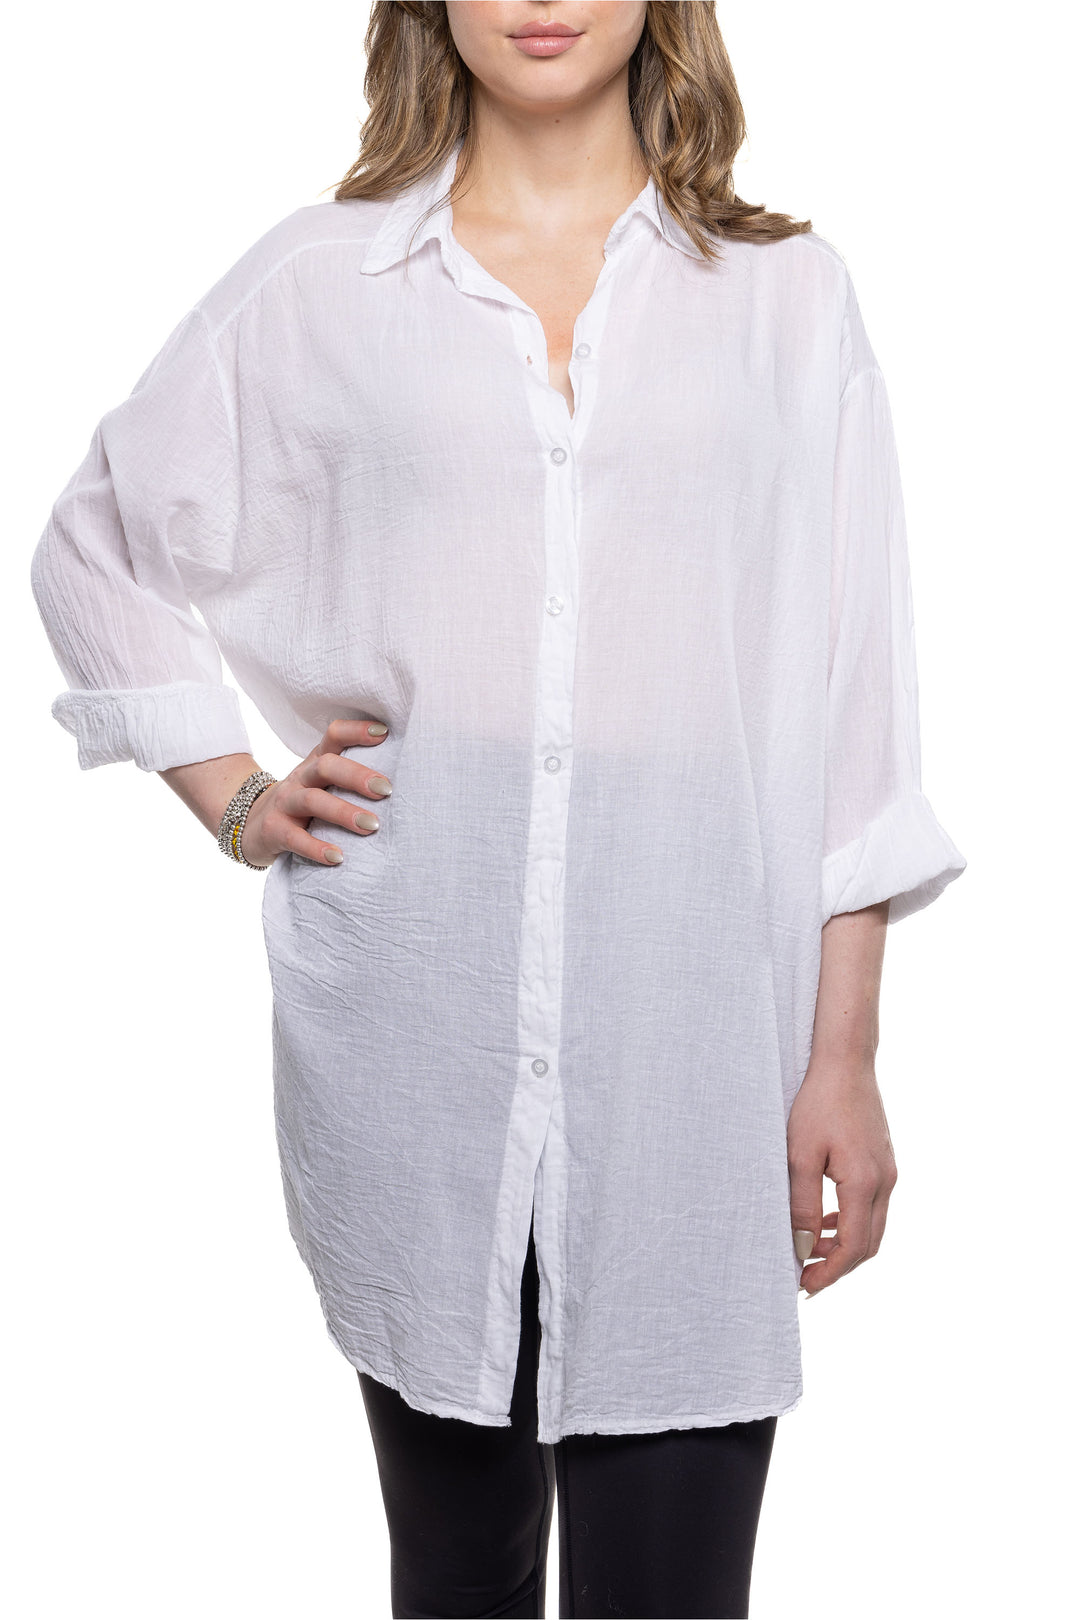 Etern Elle Summer 2024 The lightweight material makes it feel as light as a feather. Its tunic length provides a versatile and comfortable fit.